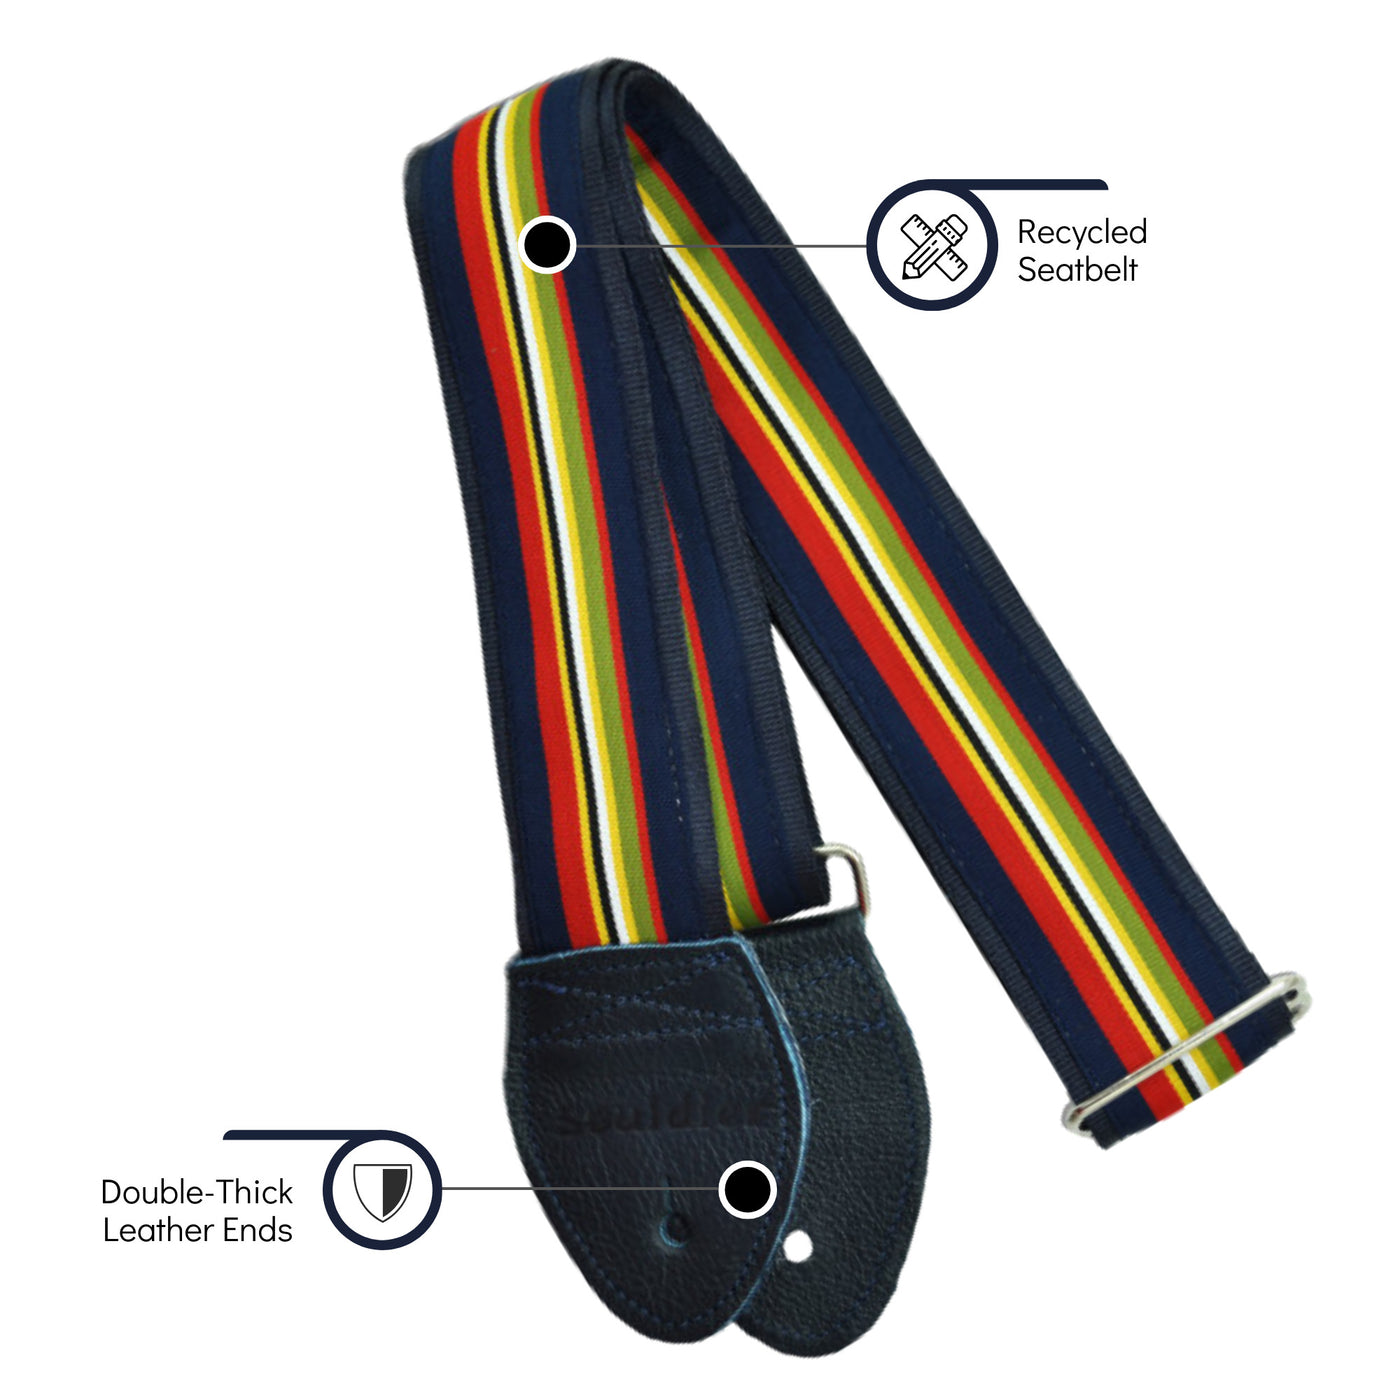 Souldier GS0761NV04NV - Handmade Seatbelt Guitar Strap for Bass, Electric or Acoustic Guitar, 2 Inches Wide and Adjustable Length from 30" to 63"  Made in the USA, Providence, Navy